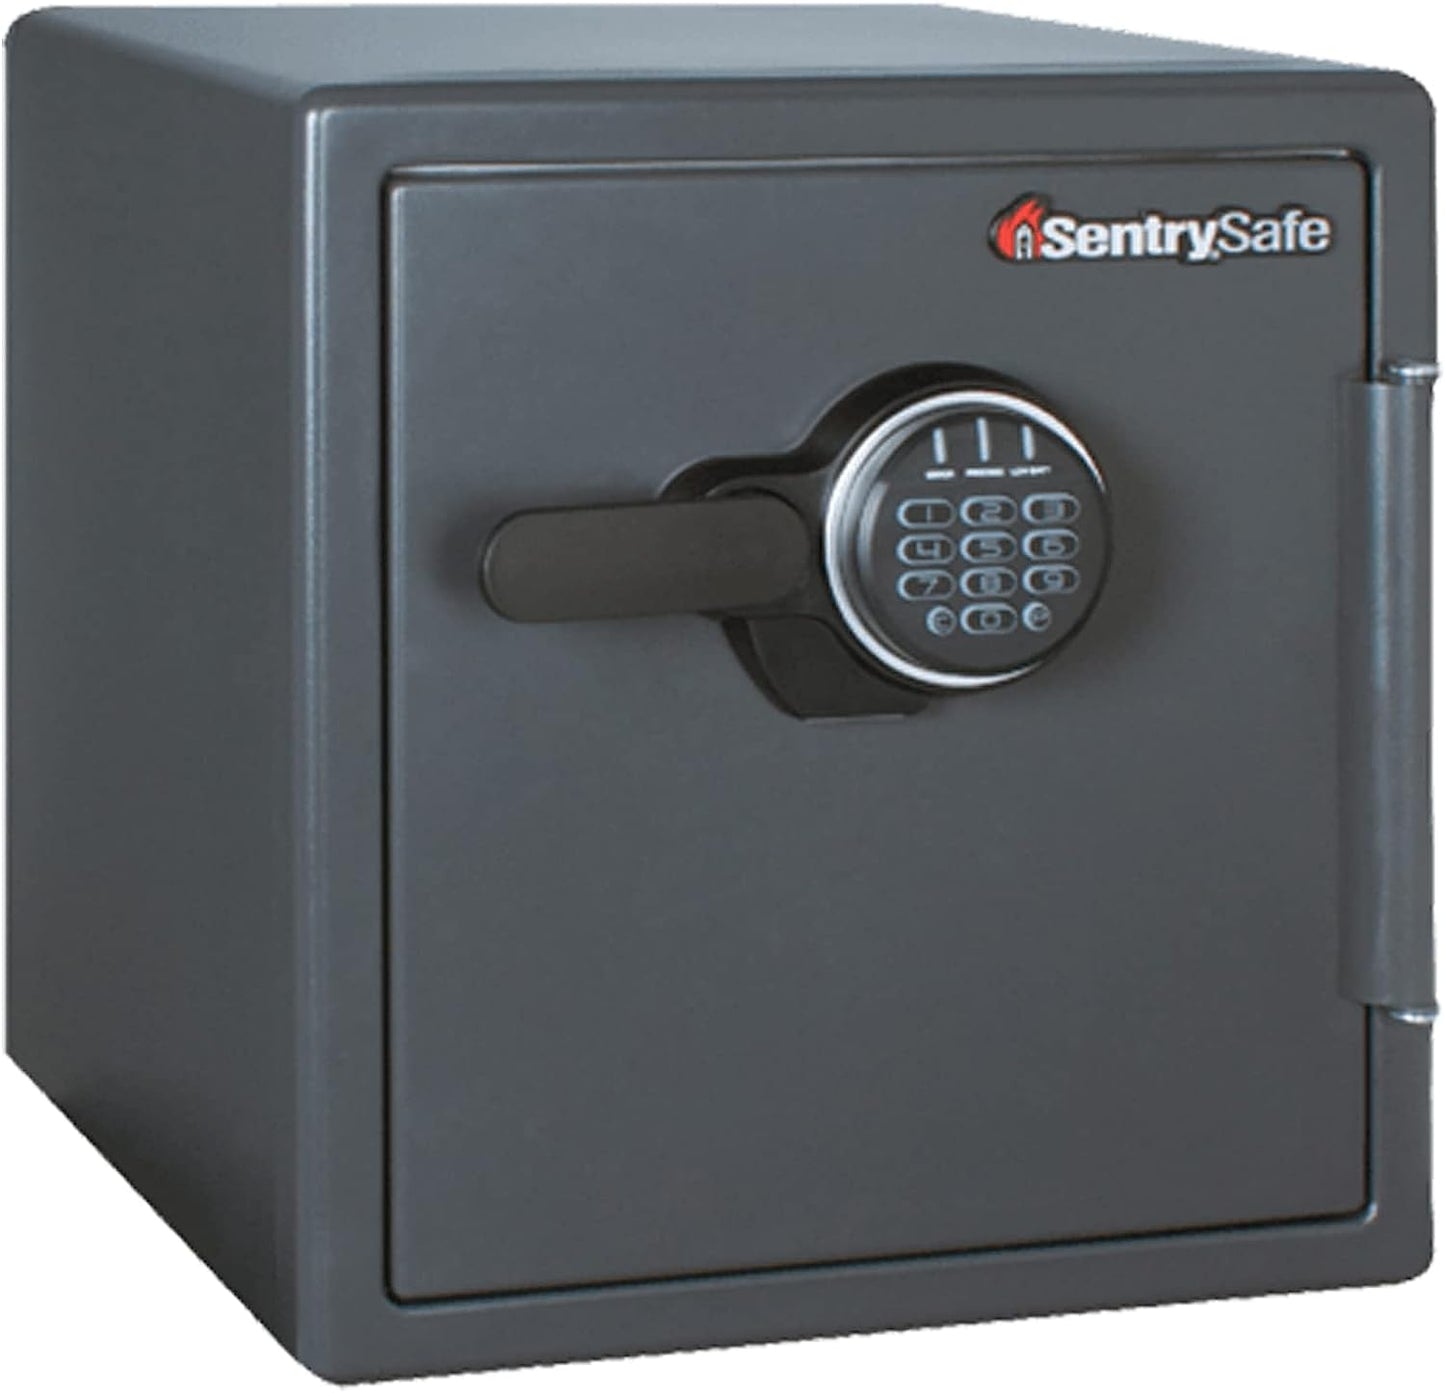 SentrySafe Fireproof Steel Home Safe with Digital Keypad Lock, Secure Valuables, Jewelry and Documents, 1.19 Cubic Feet, 17.8 x 16.3 x 19.3 inches, SF123ES - Retail $239